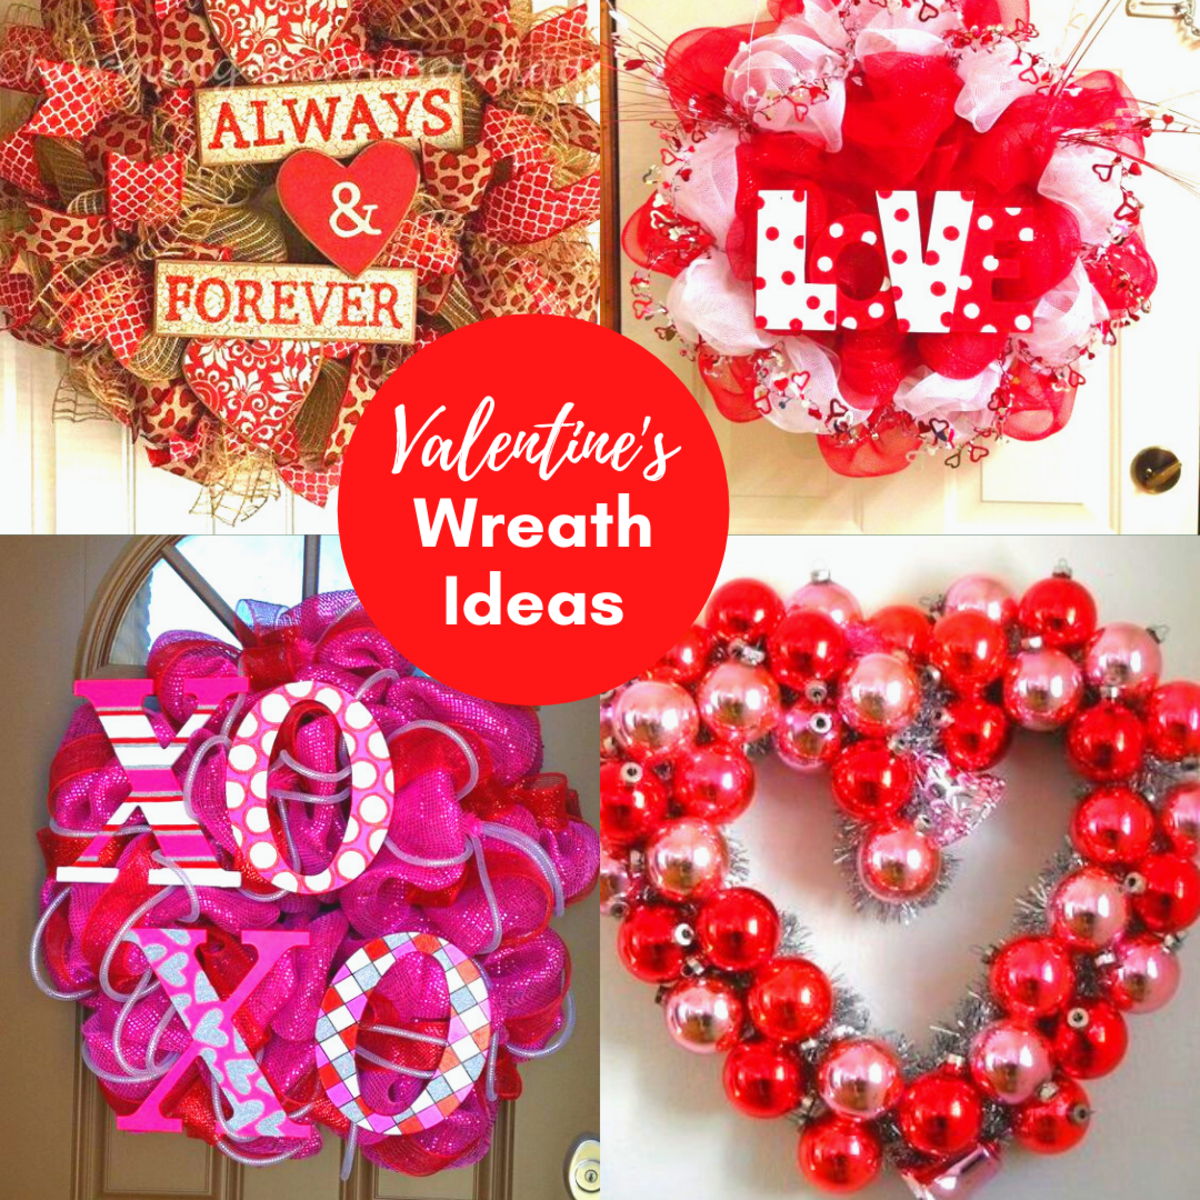 Add romance to your door or wall on Valentine's Day by hanging up a DIY wreath!